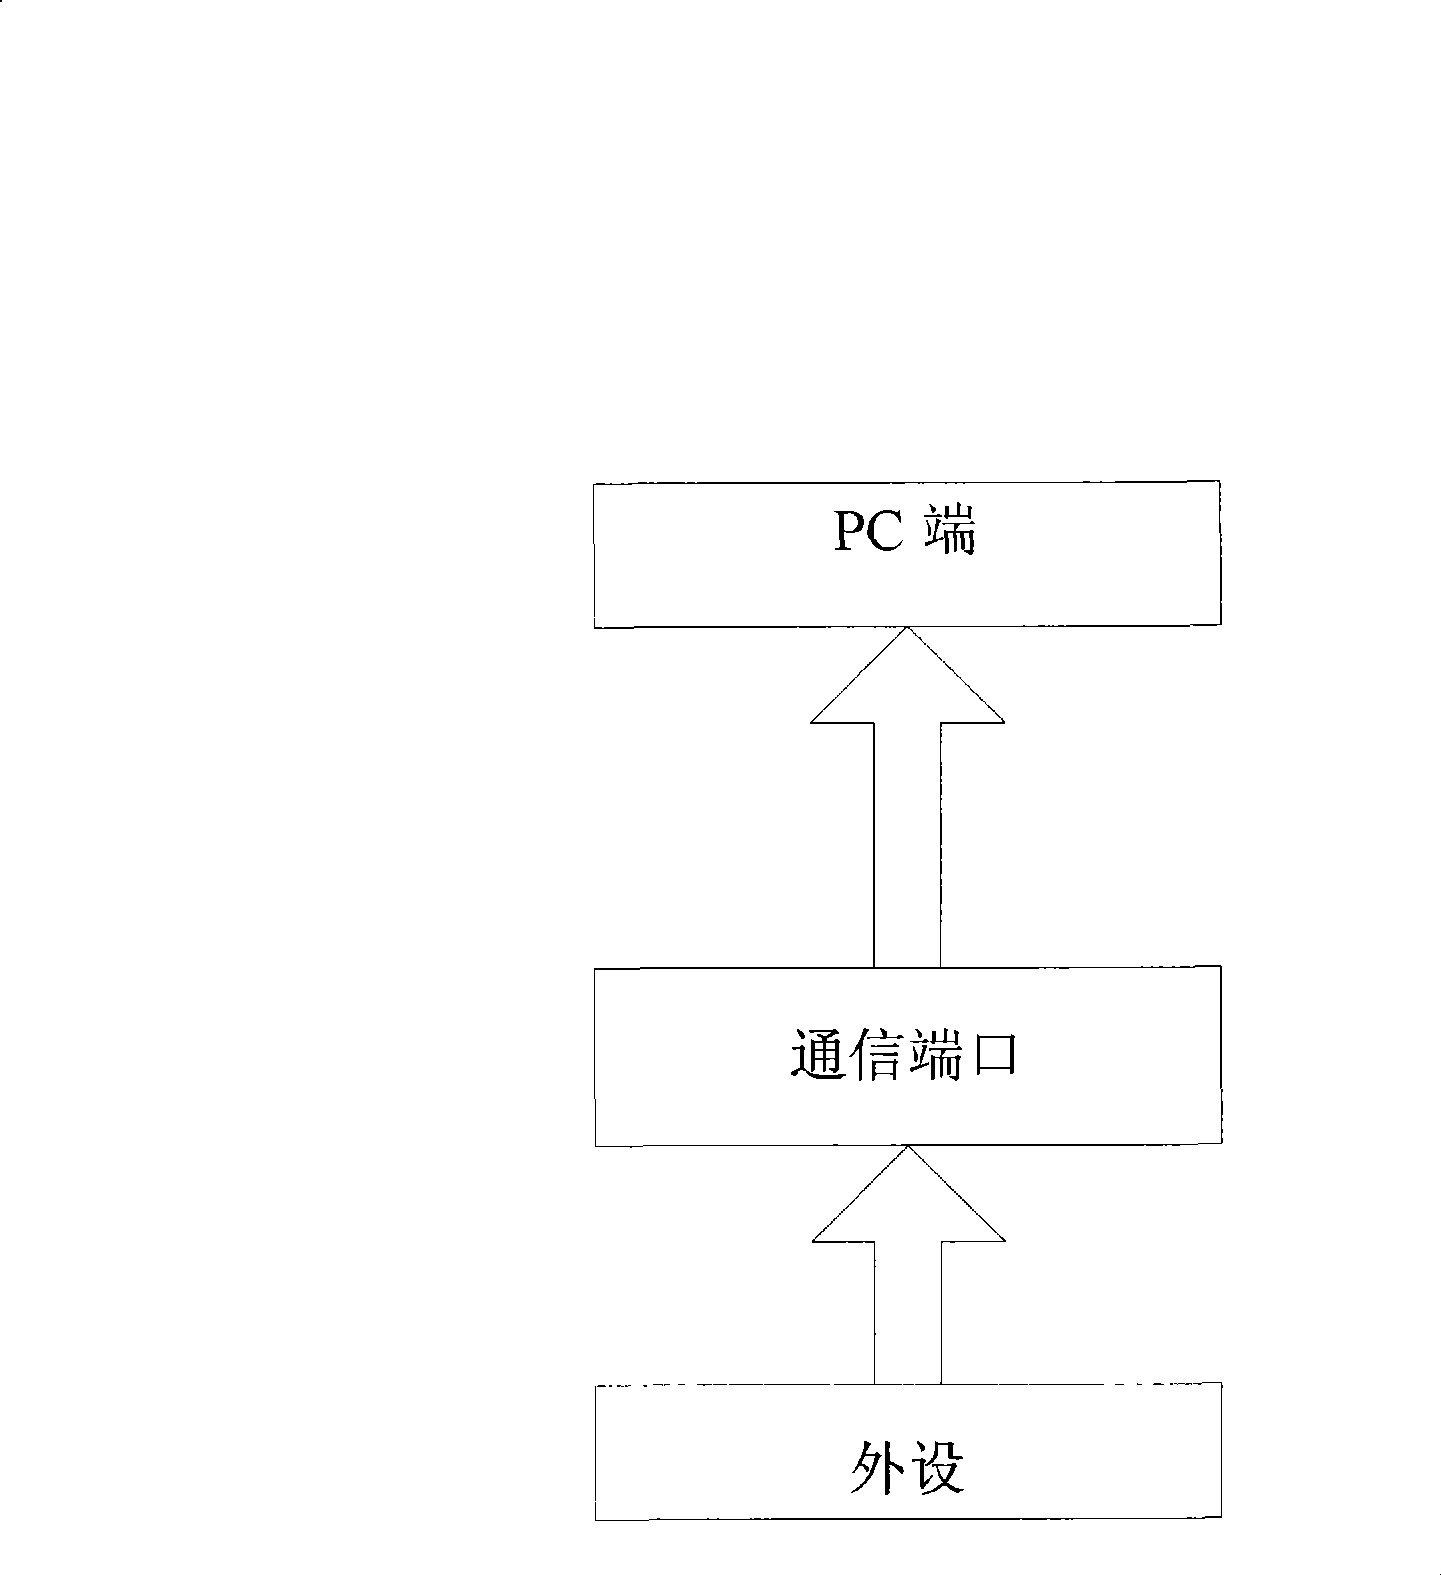 Method for responding and stopping response of host computer and processing peripheral interrupt